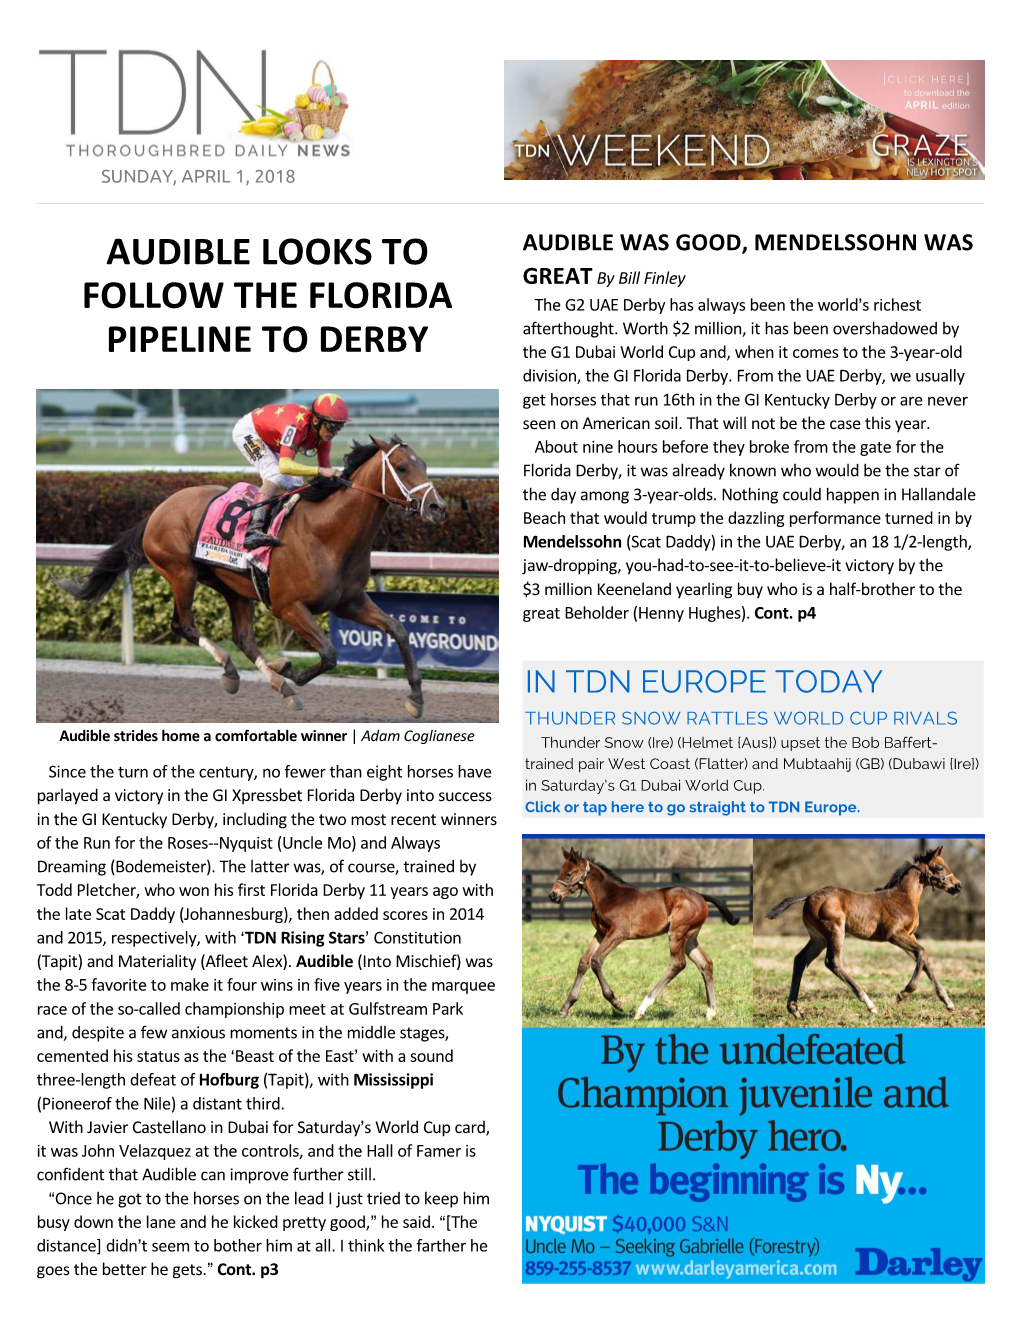 Audible Looks to Follow the Florida Pipeline to Derby